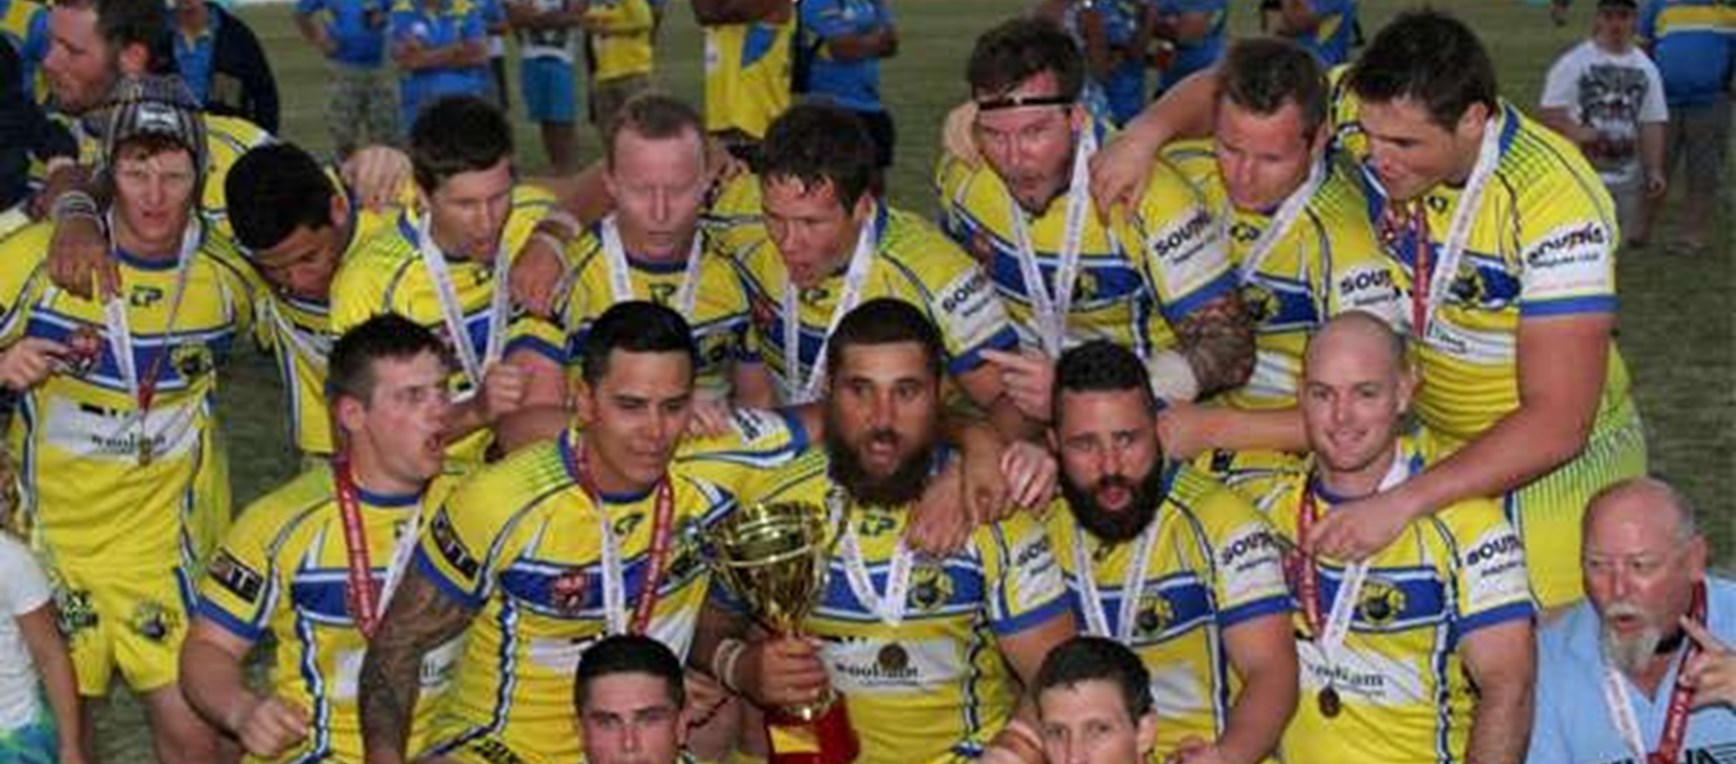 Mackay and District Grand Final Day in Pictures